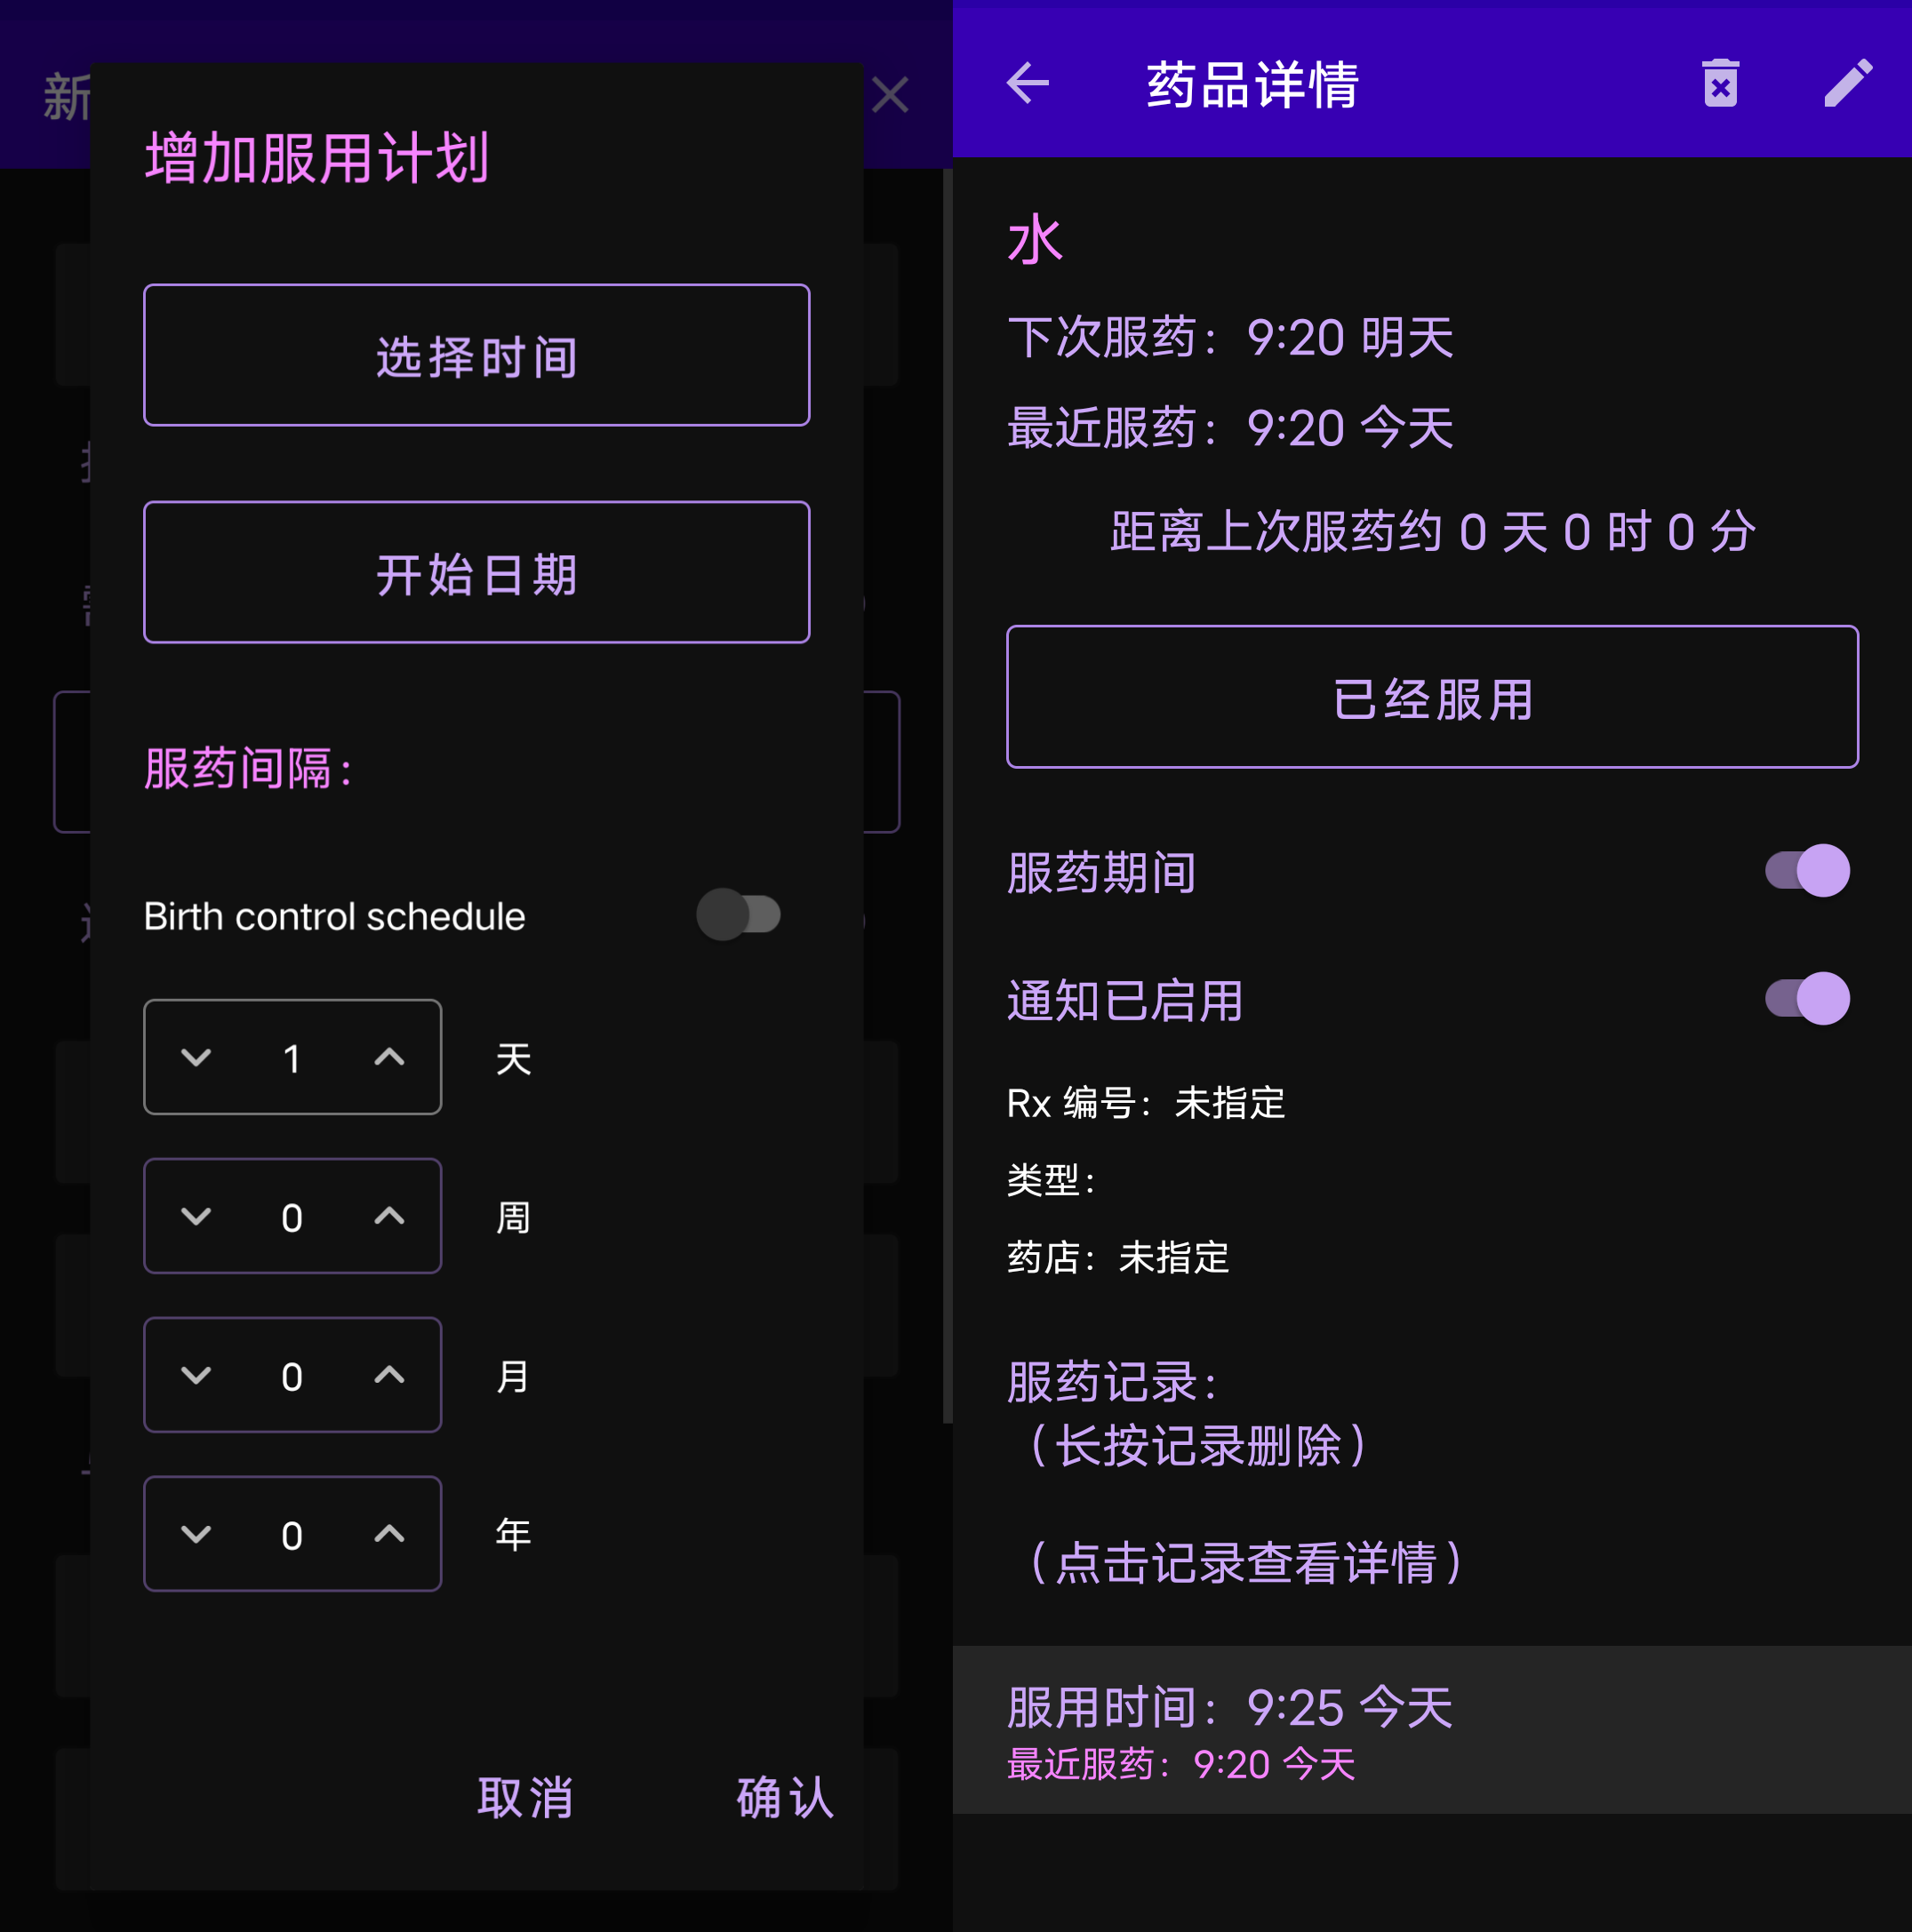 Android 我吃药了吗？_1.6.5